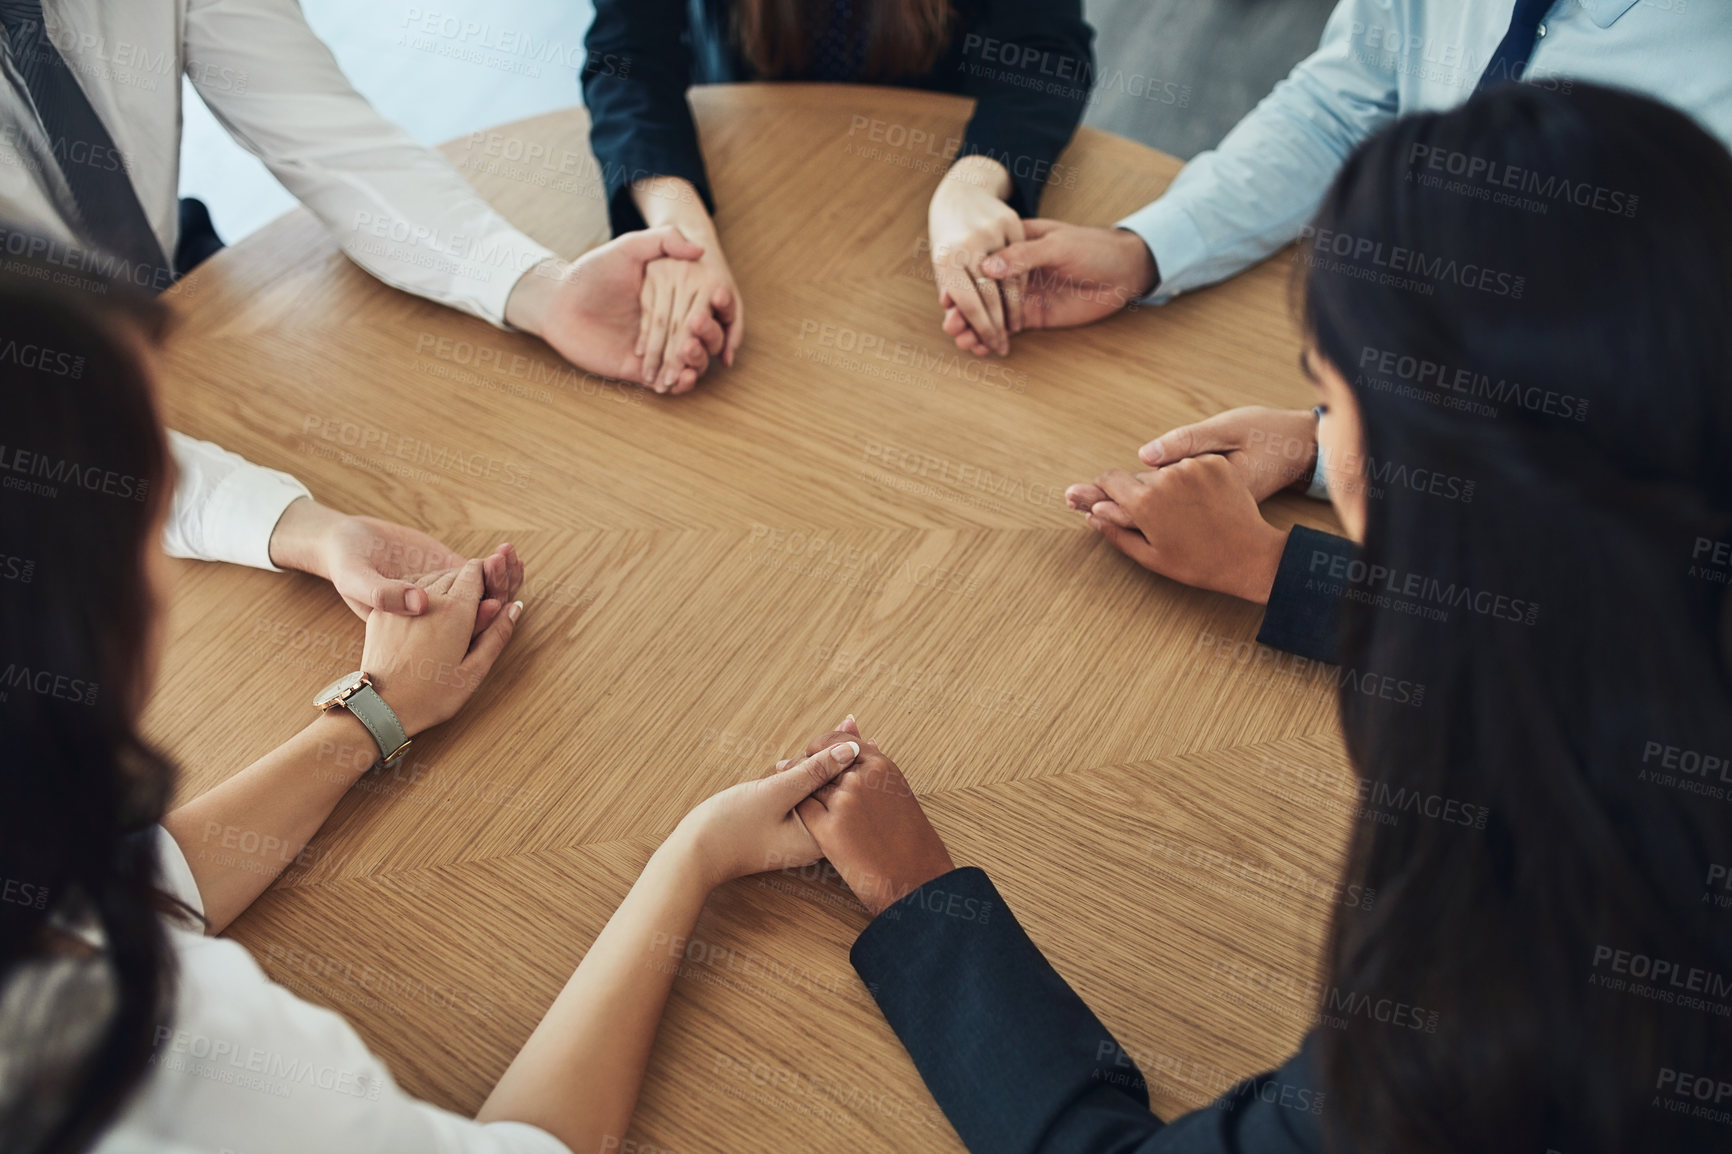 Buy stock photo Cropped shot of a group of businesspeople sitting together at a table and holding hands